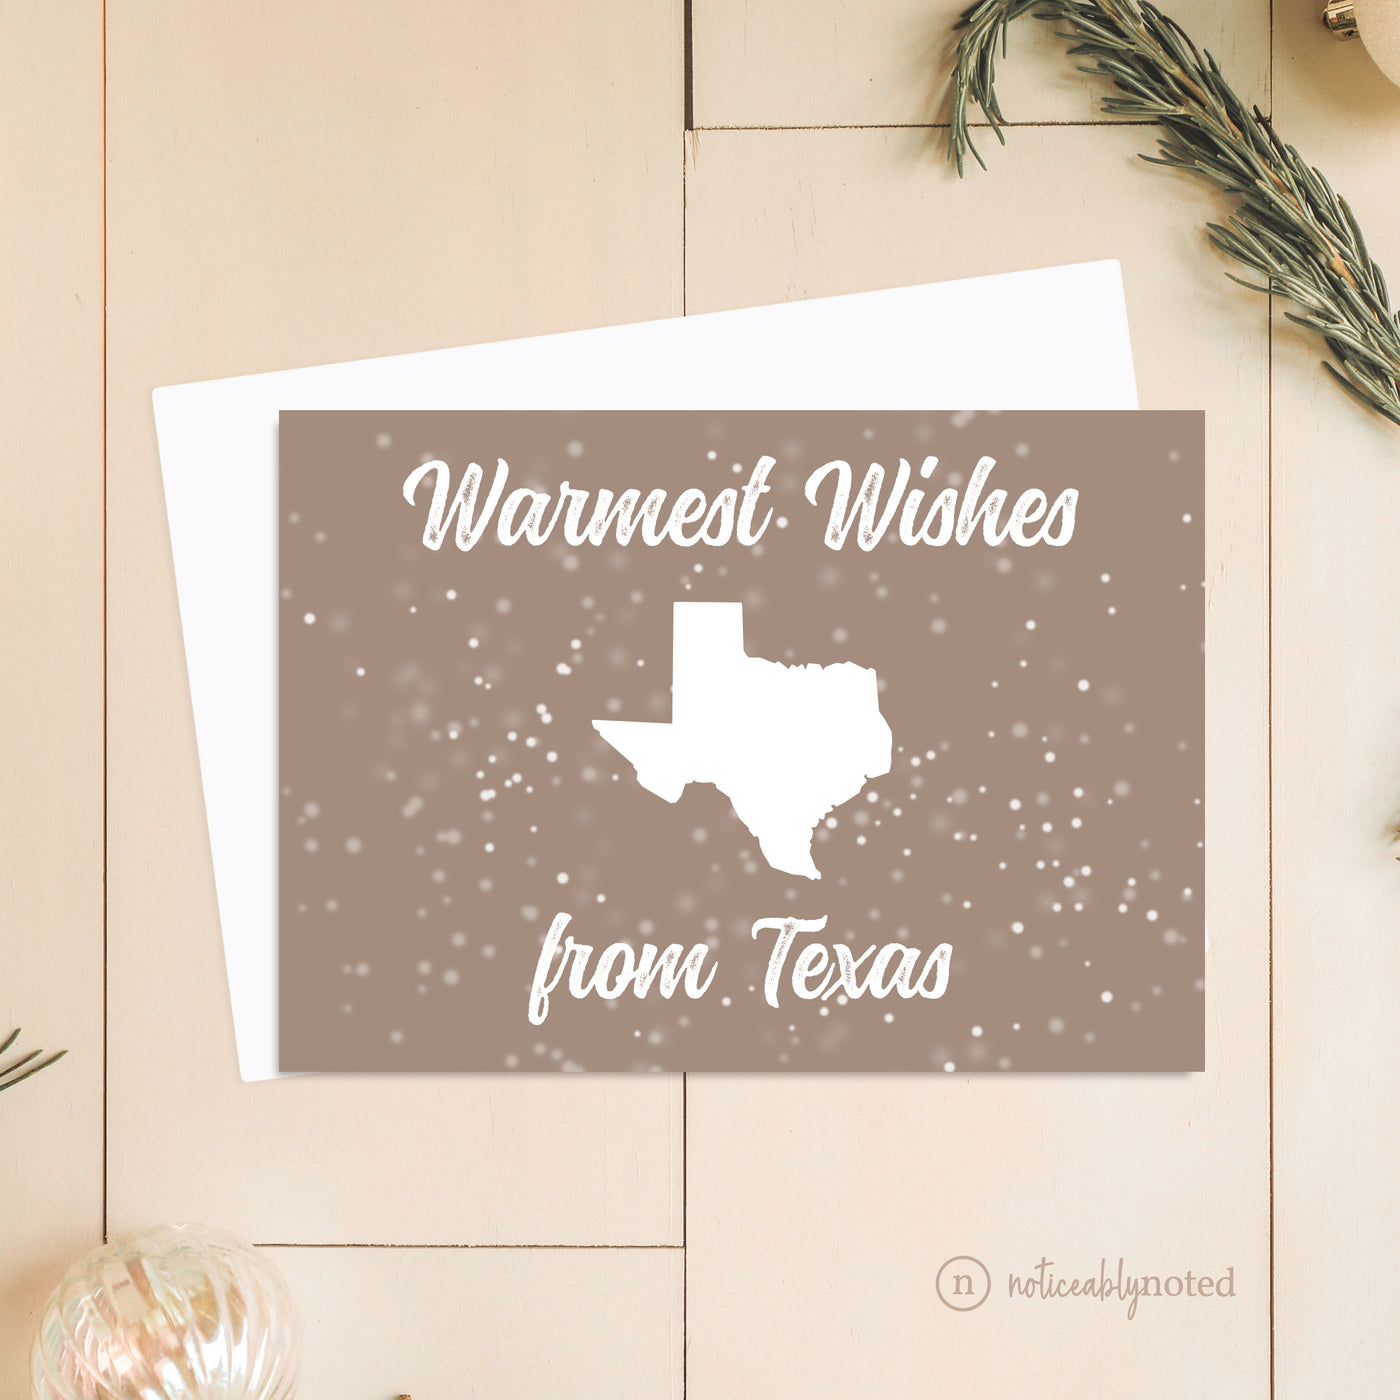 TX Christmas Card | Noticeably Noted